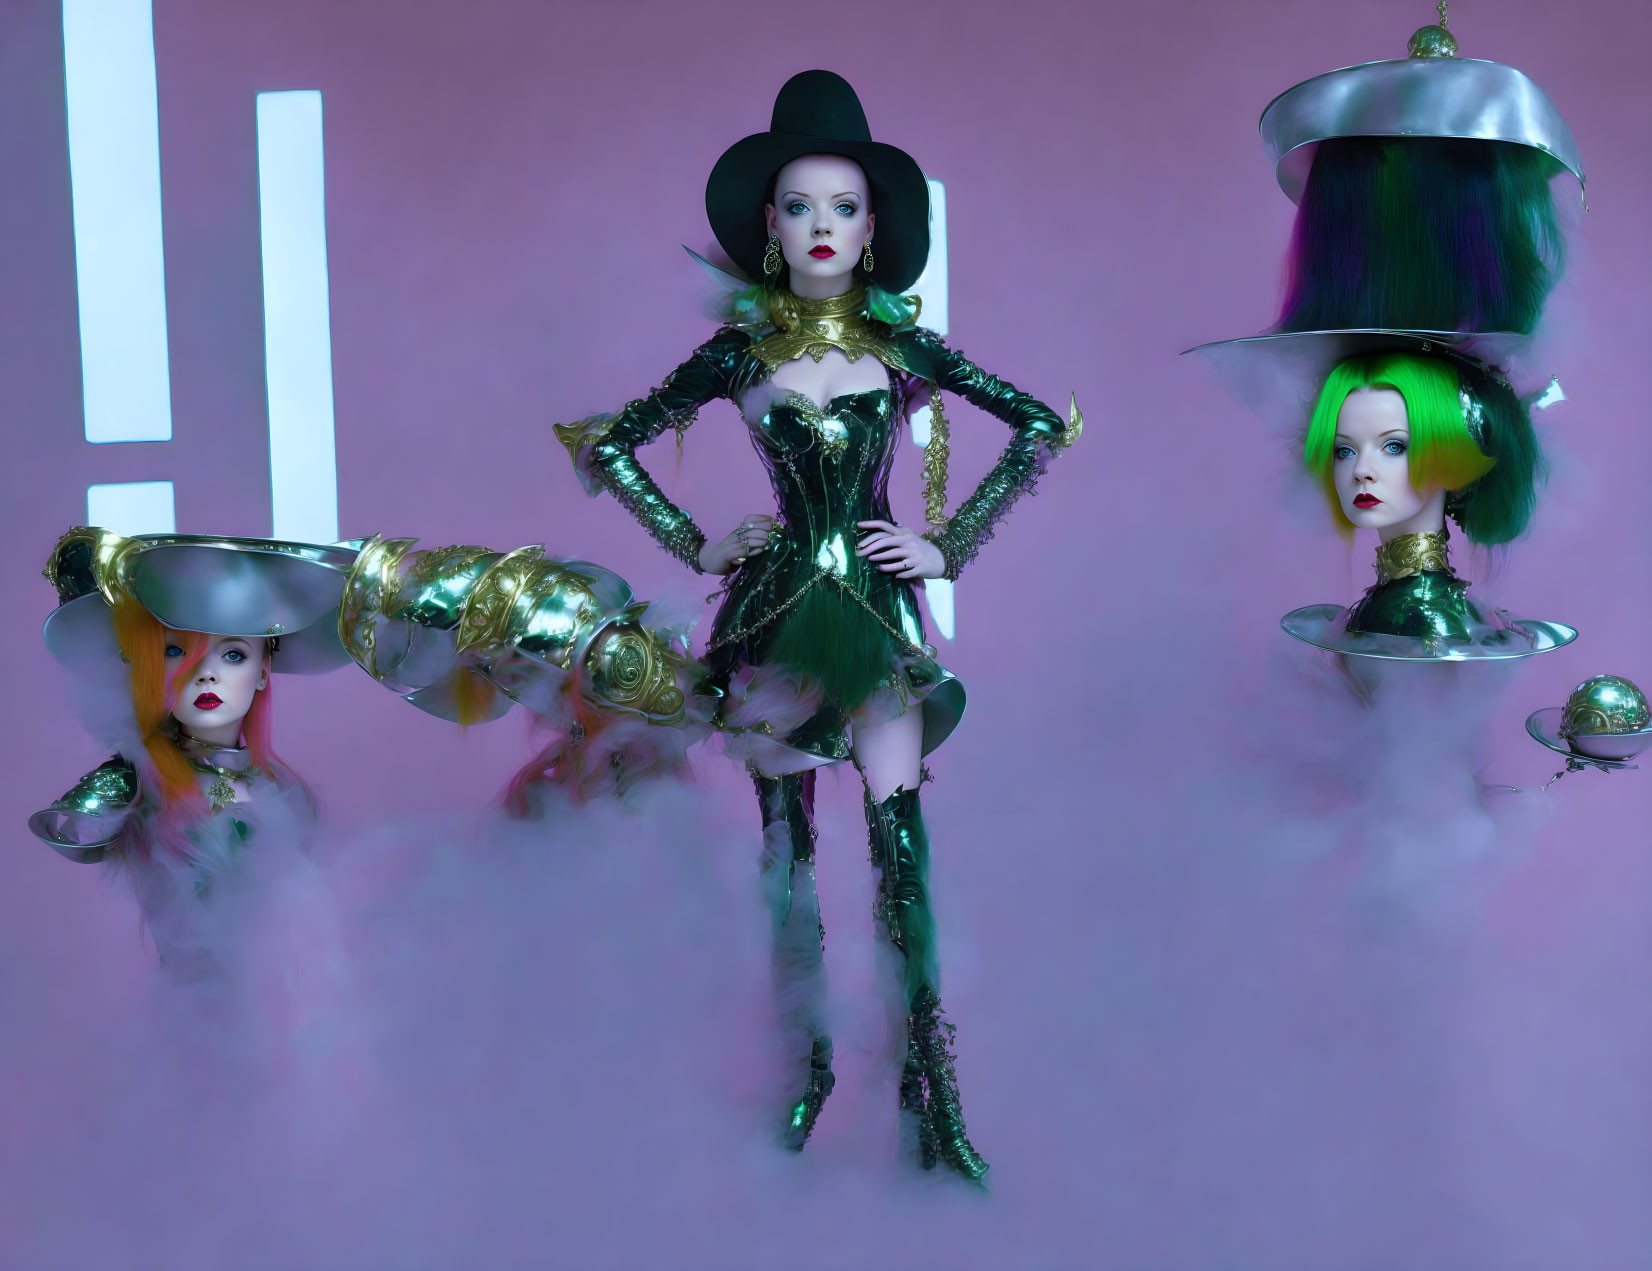 Three futuristic figures in oversized hats and metallic accents on purple misty background